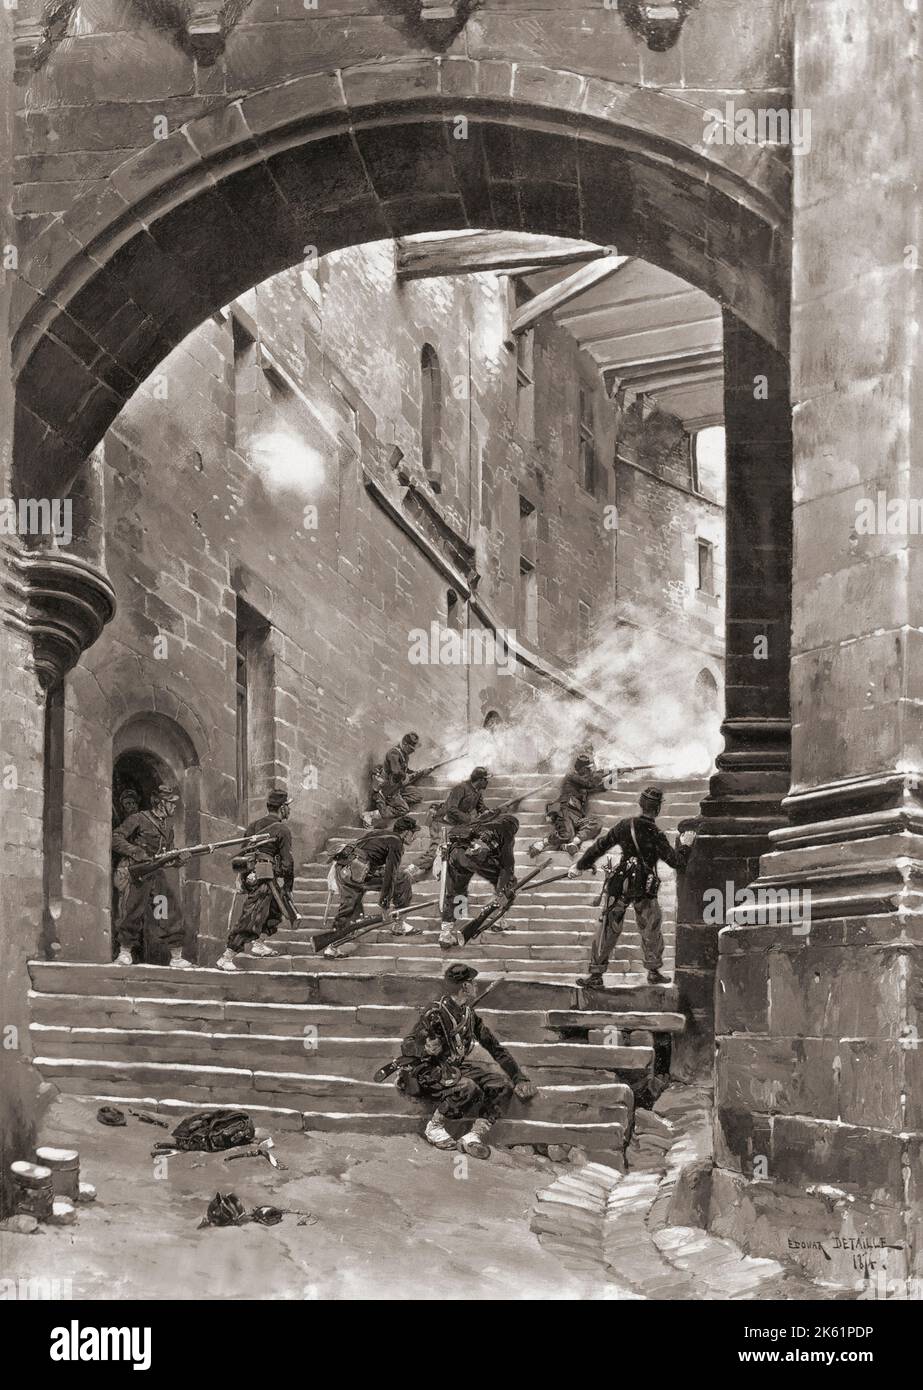 French soldiers in combat in a chateau during the Franco-Prussian War of 1870.  After a painting by Edouard Detaille. Stock Photo